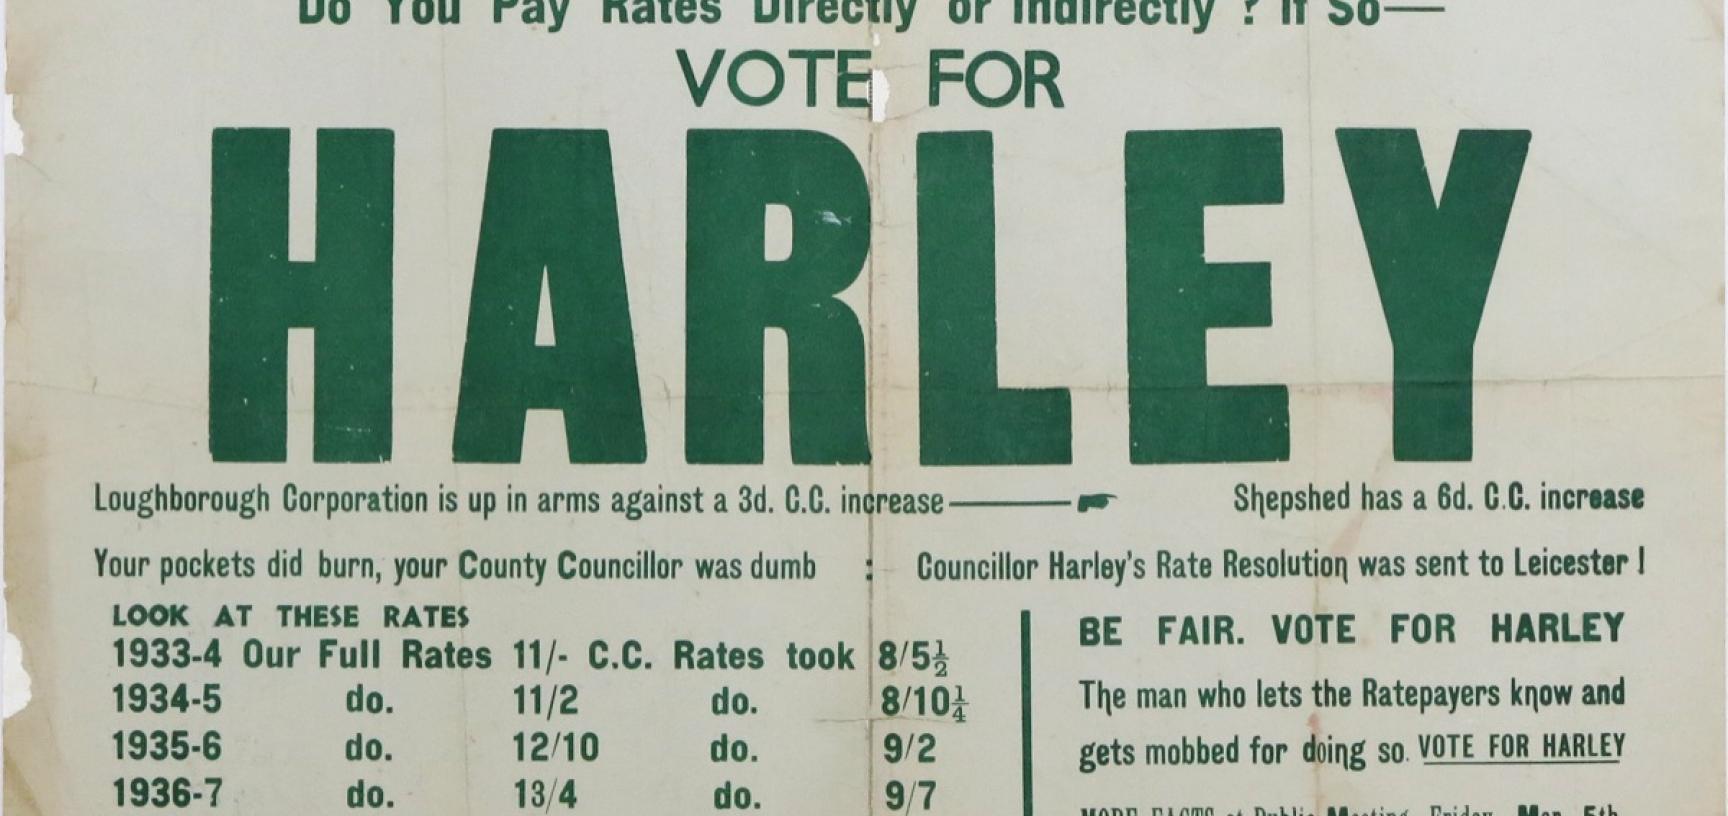 Campaign poster for the Leicestershire County Council election held on 6 March 1937: ‘VOTE FOR HARLEY The man who lets Ratepayers know and gets mobbed for doing so’. 